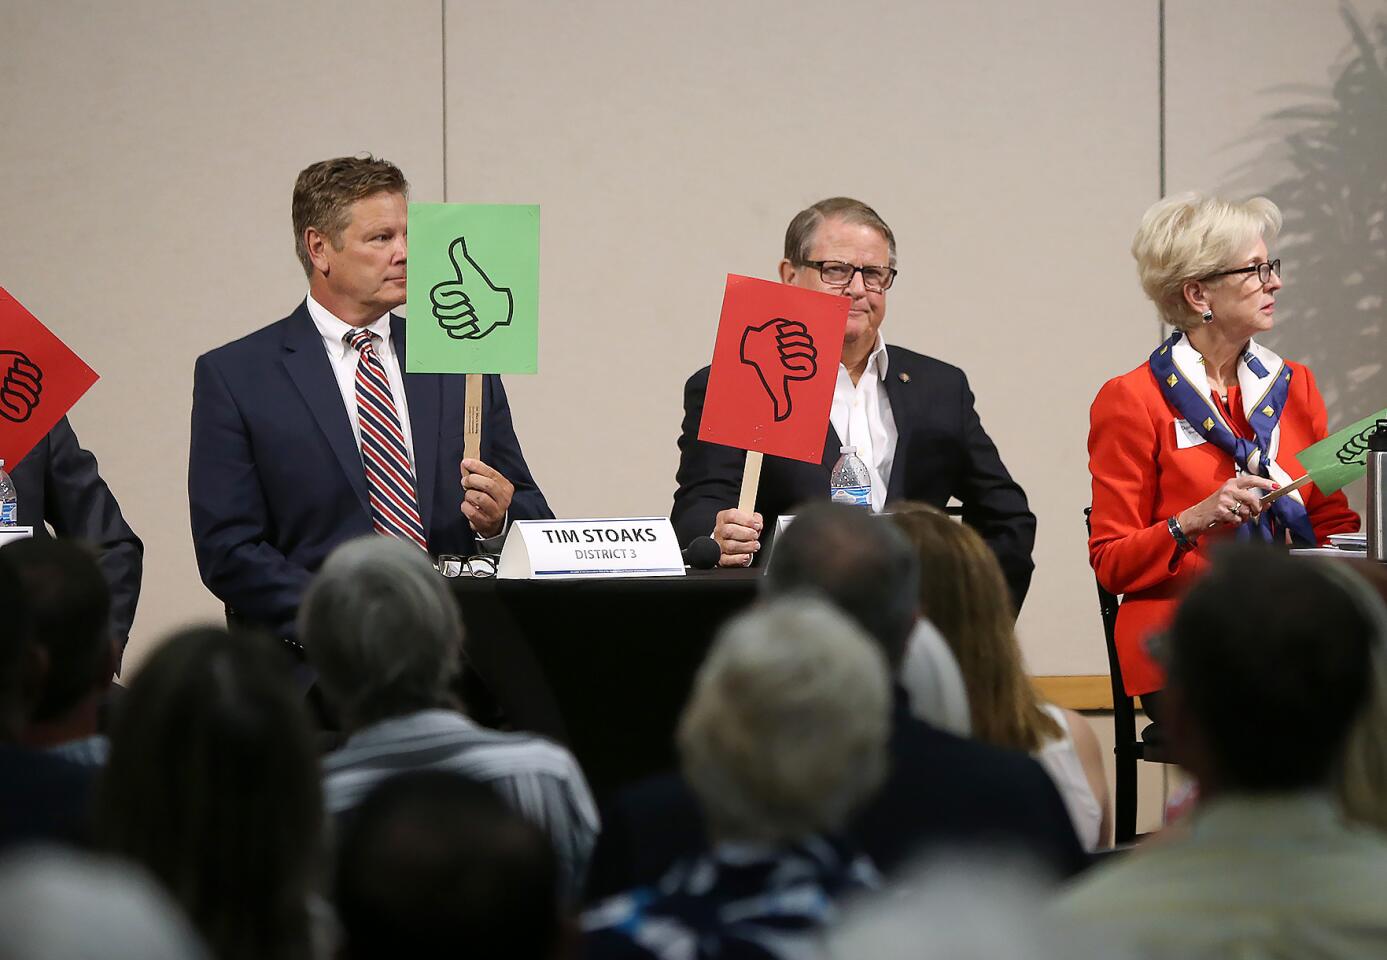 Candidates Tim Stoaks, left, and Mayor Marshall "Duffy" Duffield hold up placards showing their opposing views on a question during the first Newport Beach City Council candidates forum of the 2018 election season Thursday.